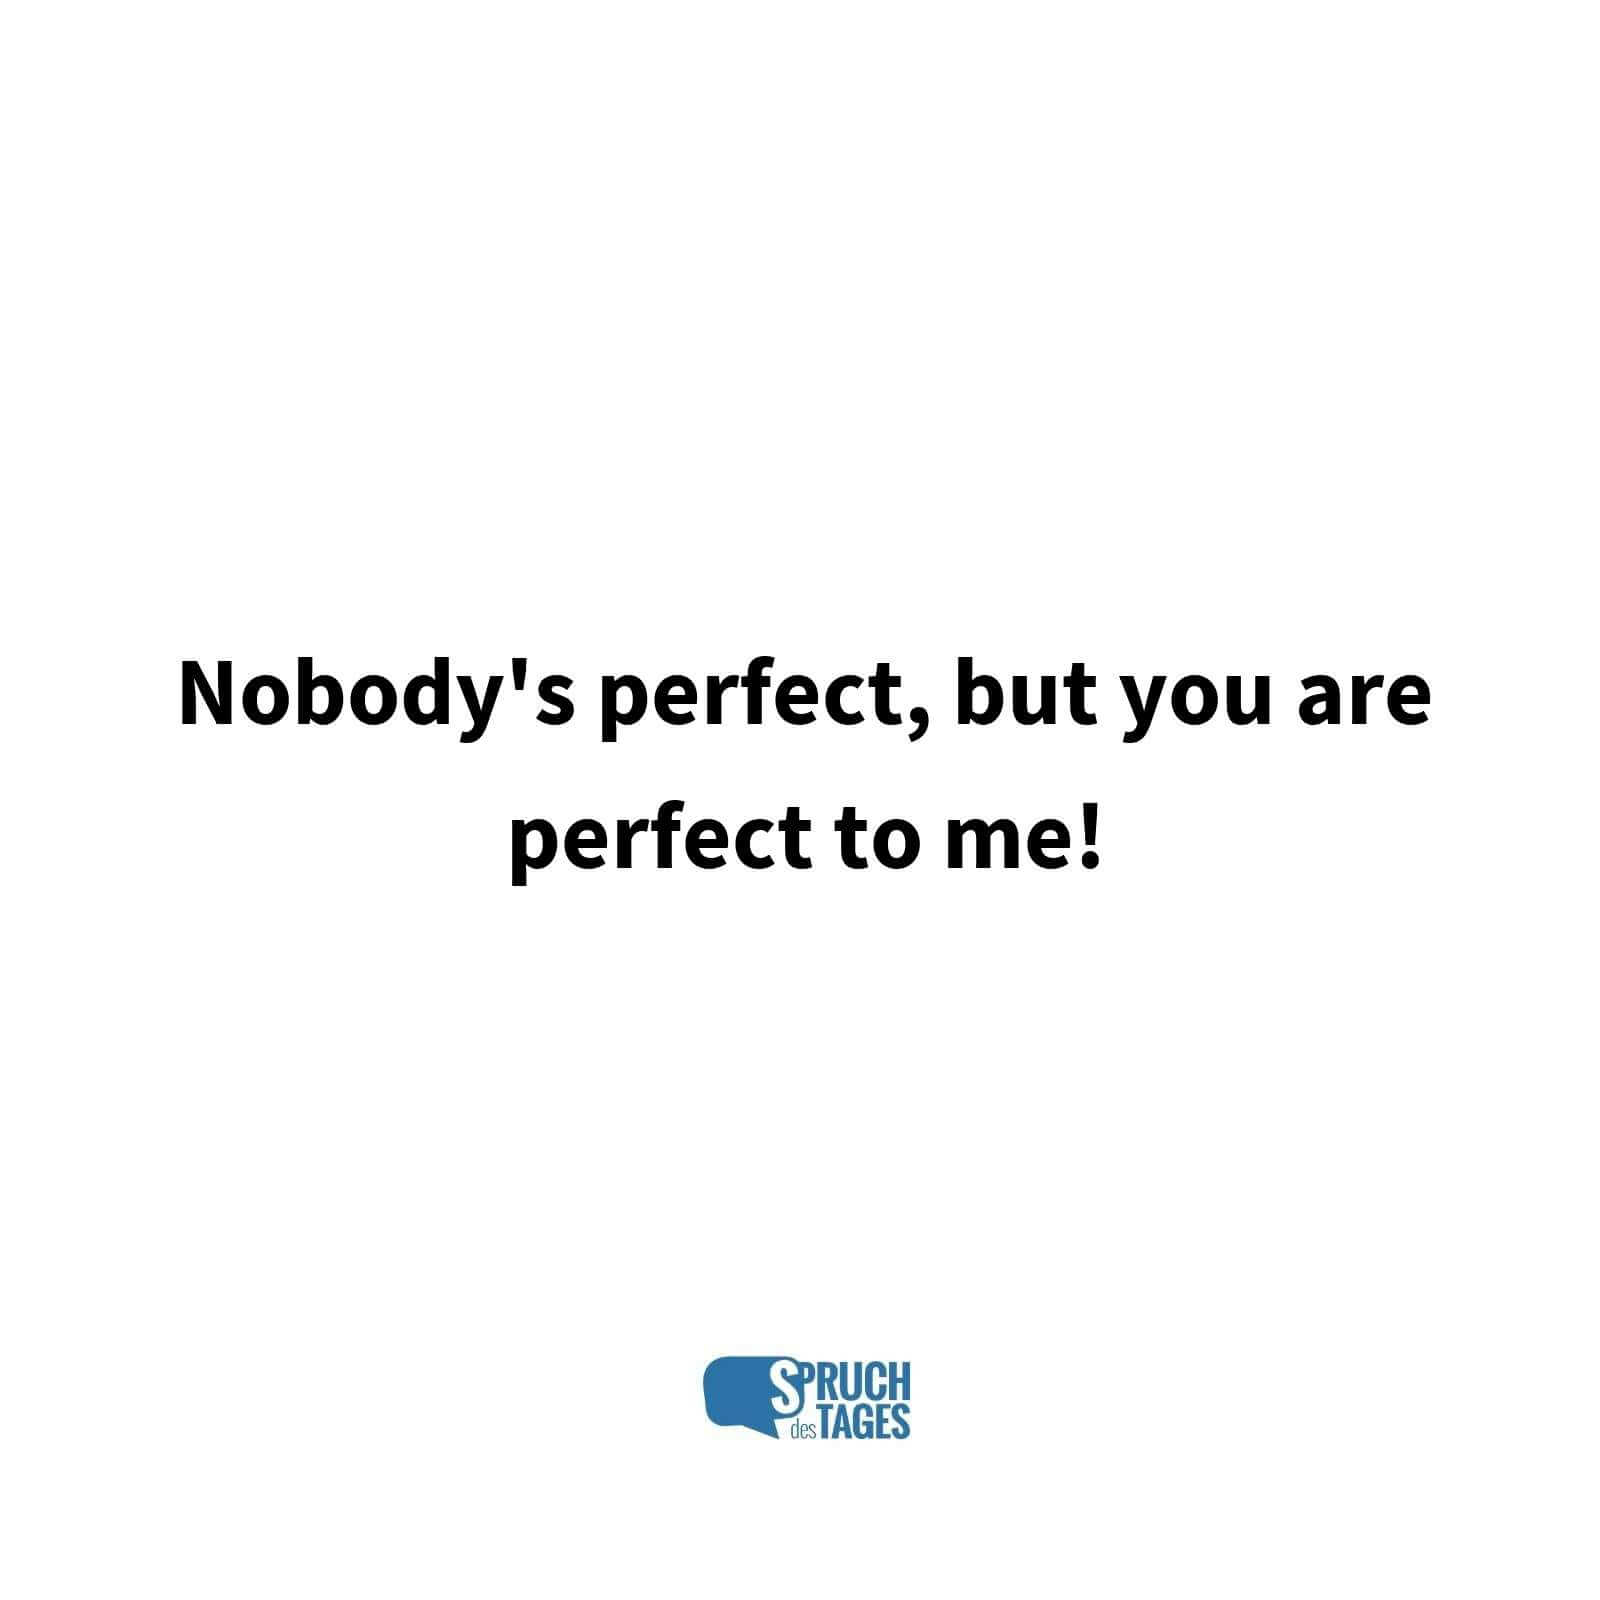 Nobody's perfect, but you are perfect to me!